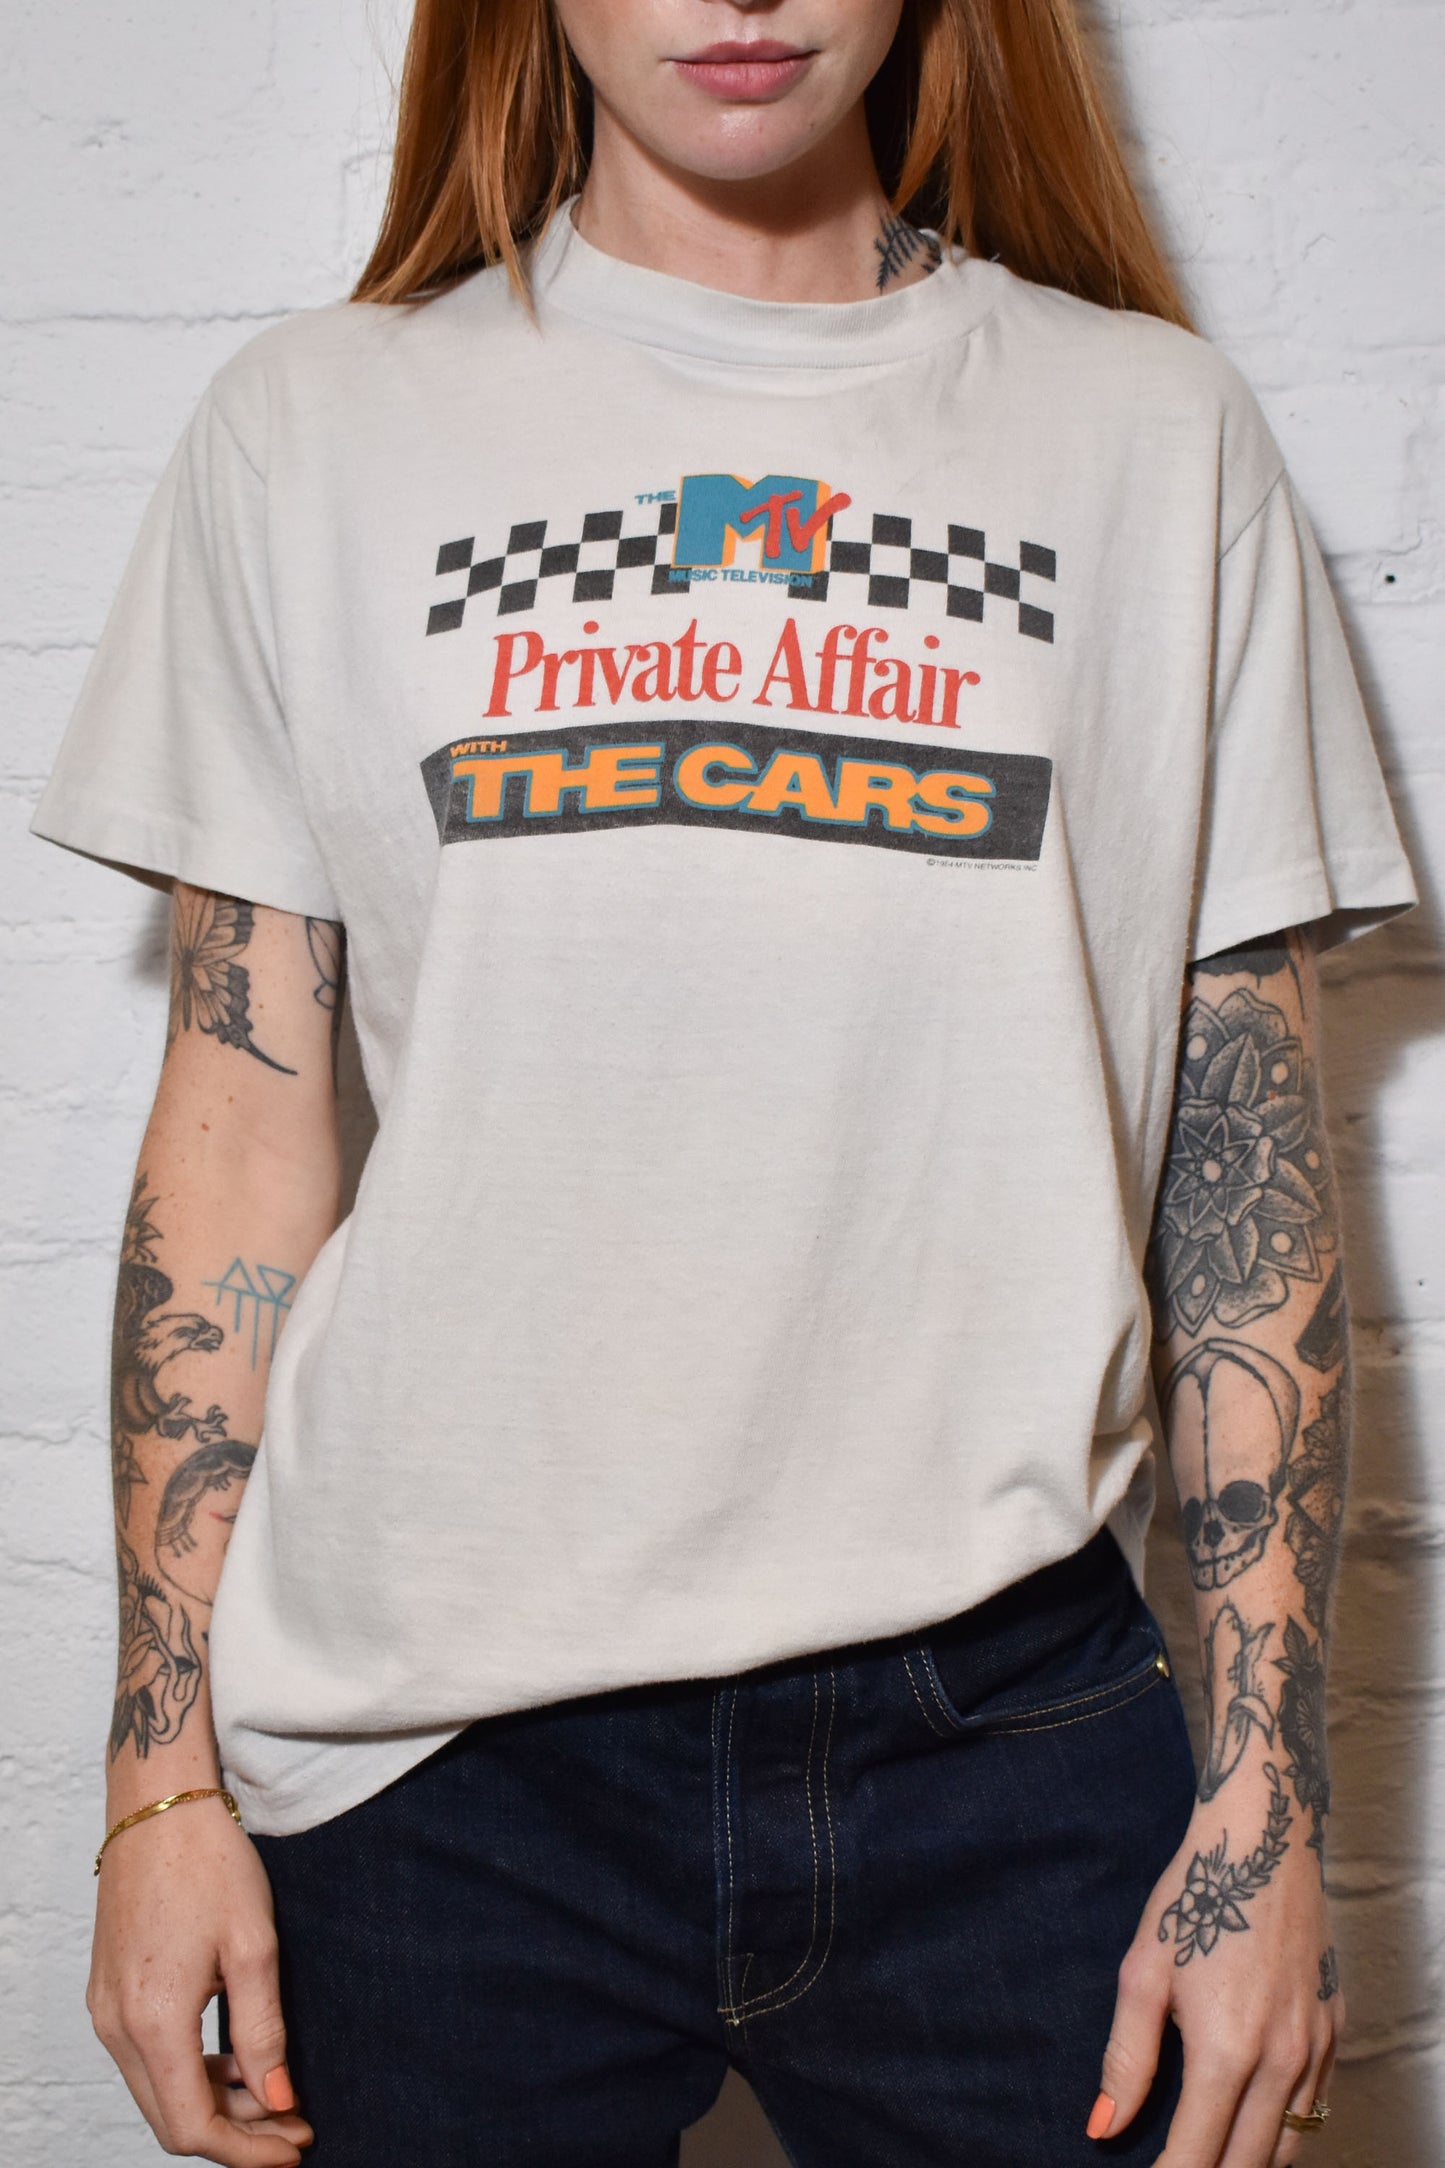 Vintage 1984 "Private Affair with The Cars MTV" T-shirt